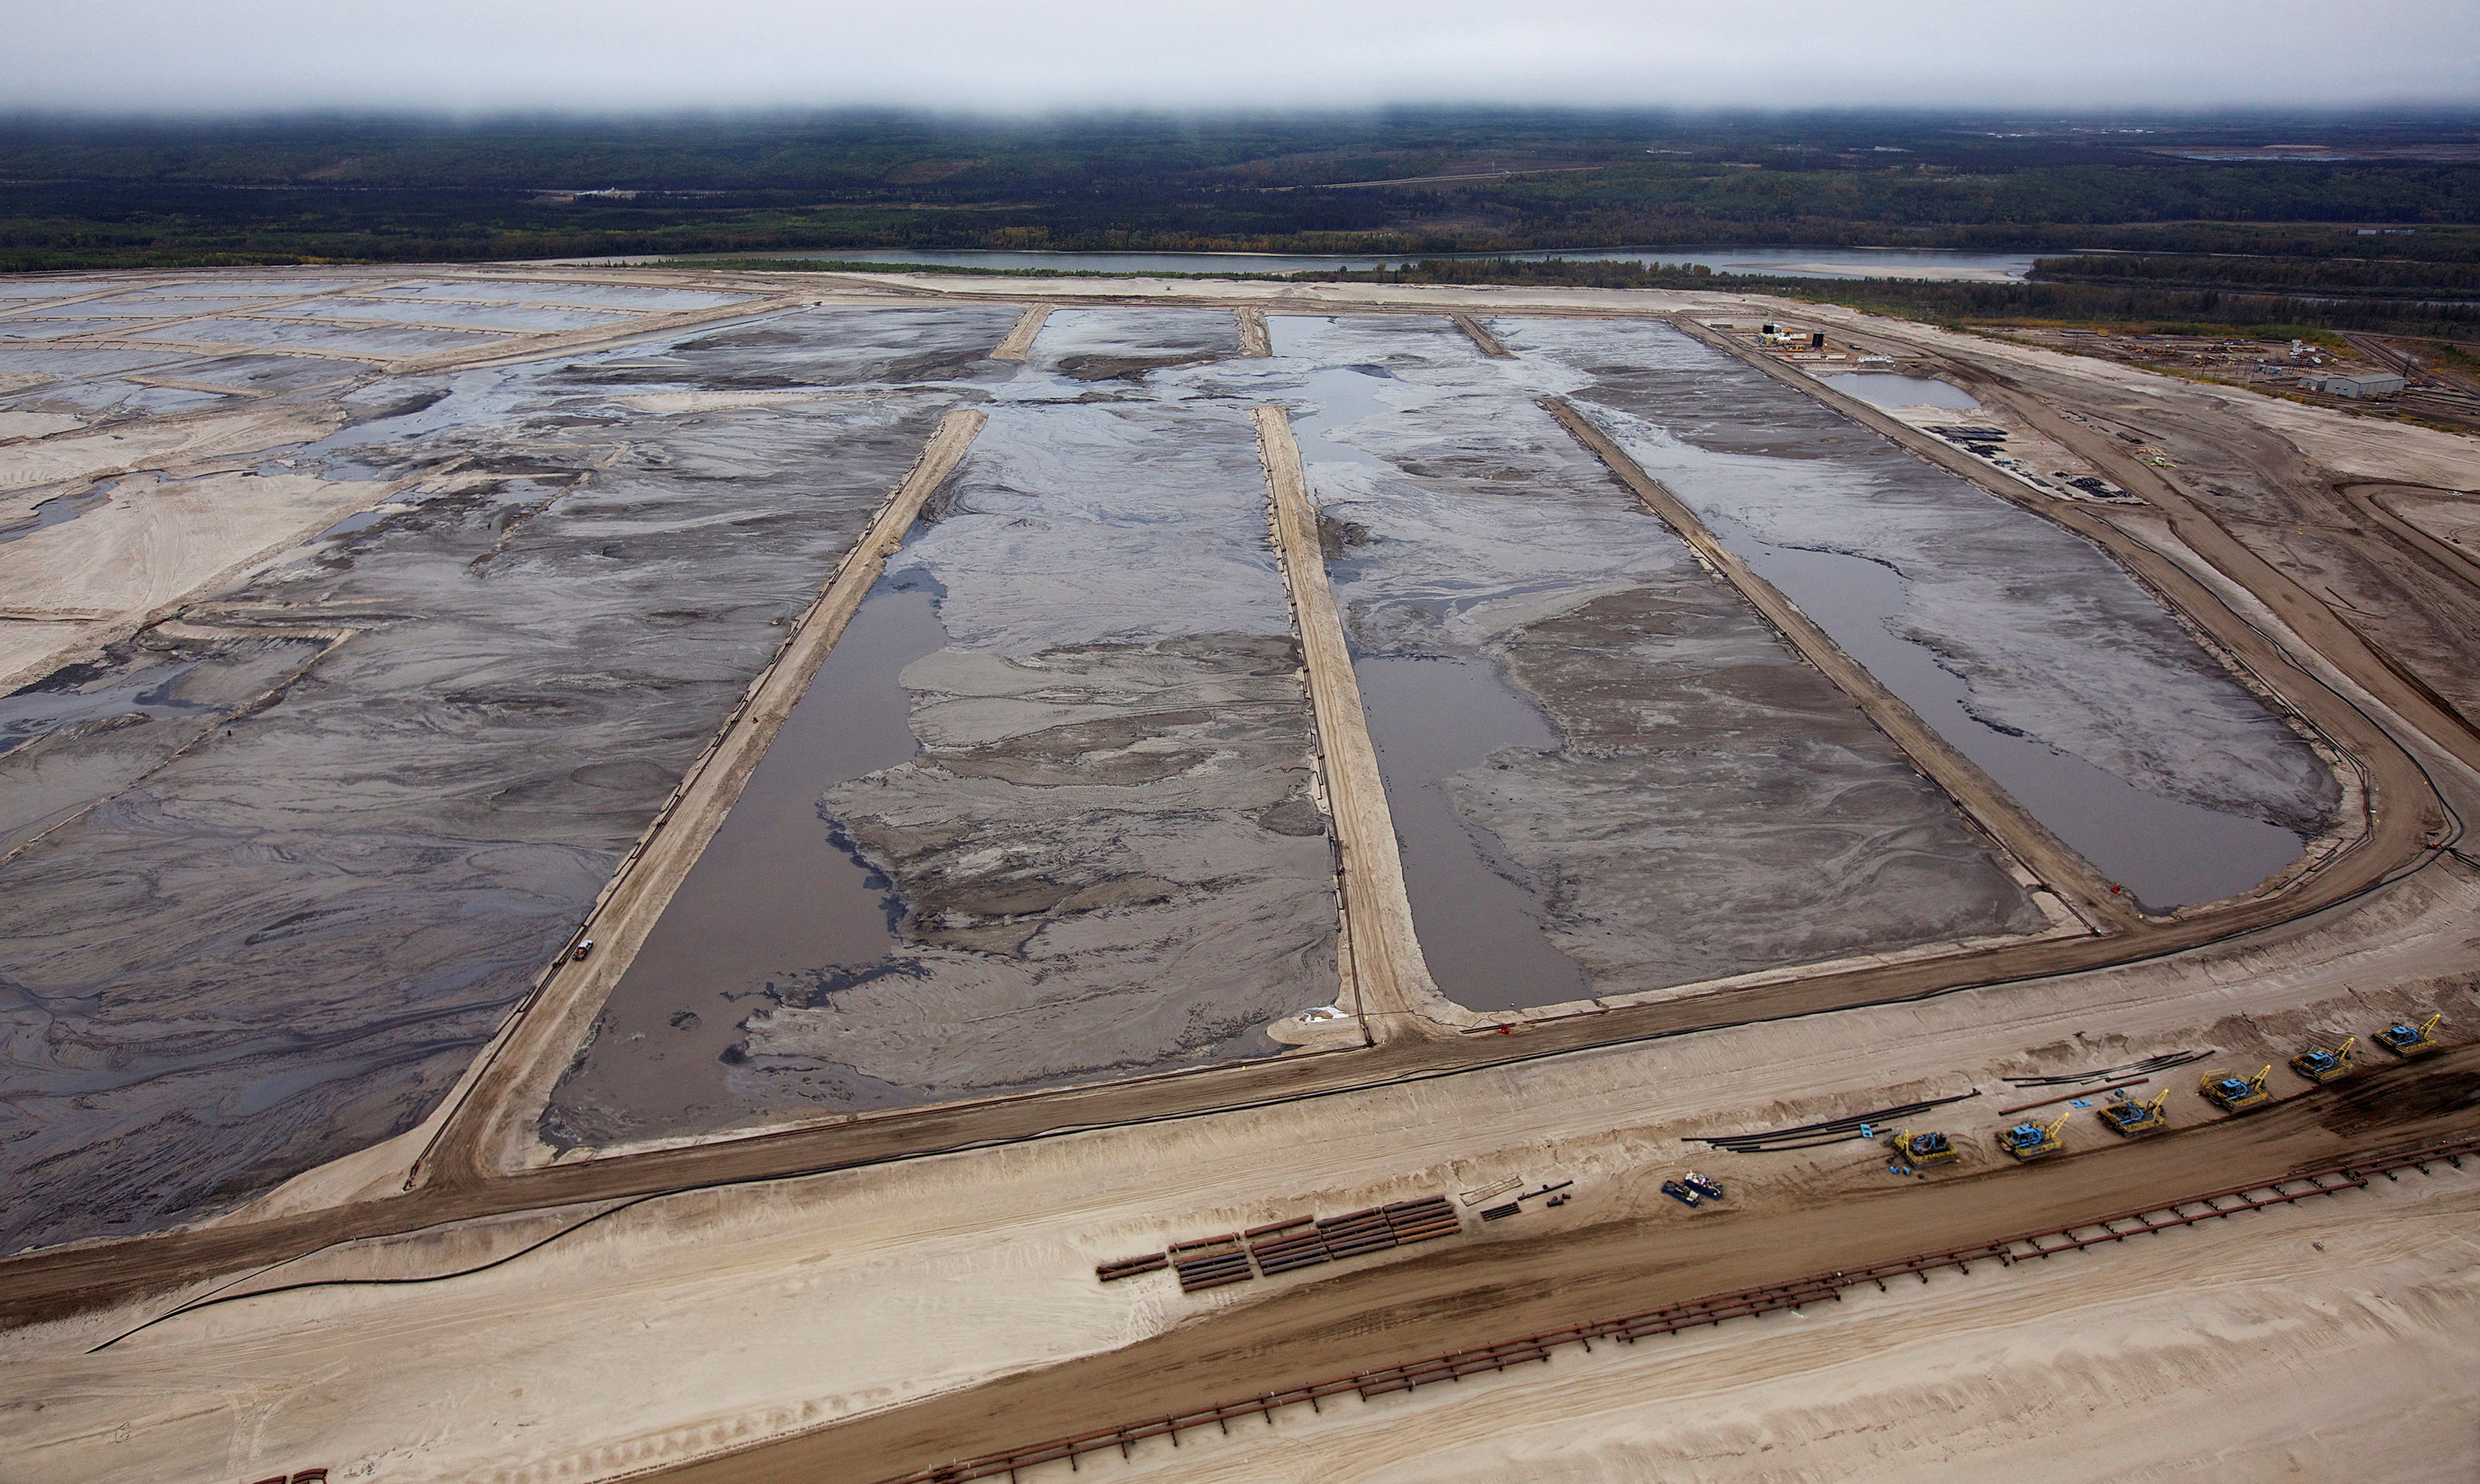 A tailings pond at the Suncor tar sands mining operations near Fort McMurray.